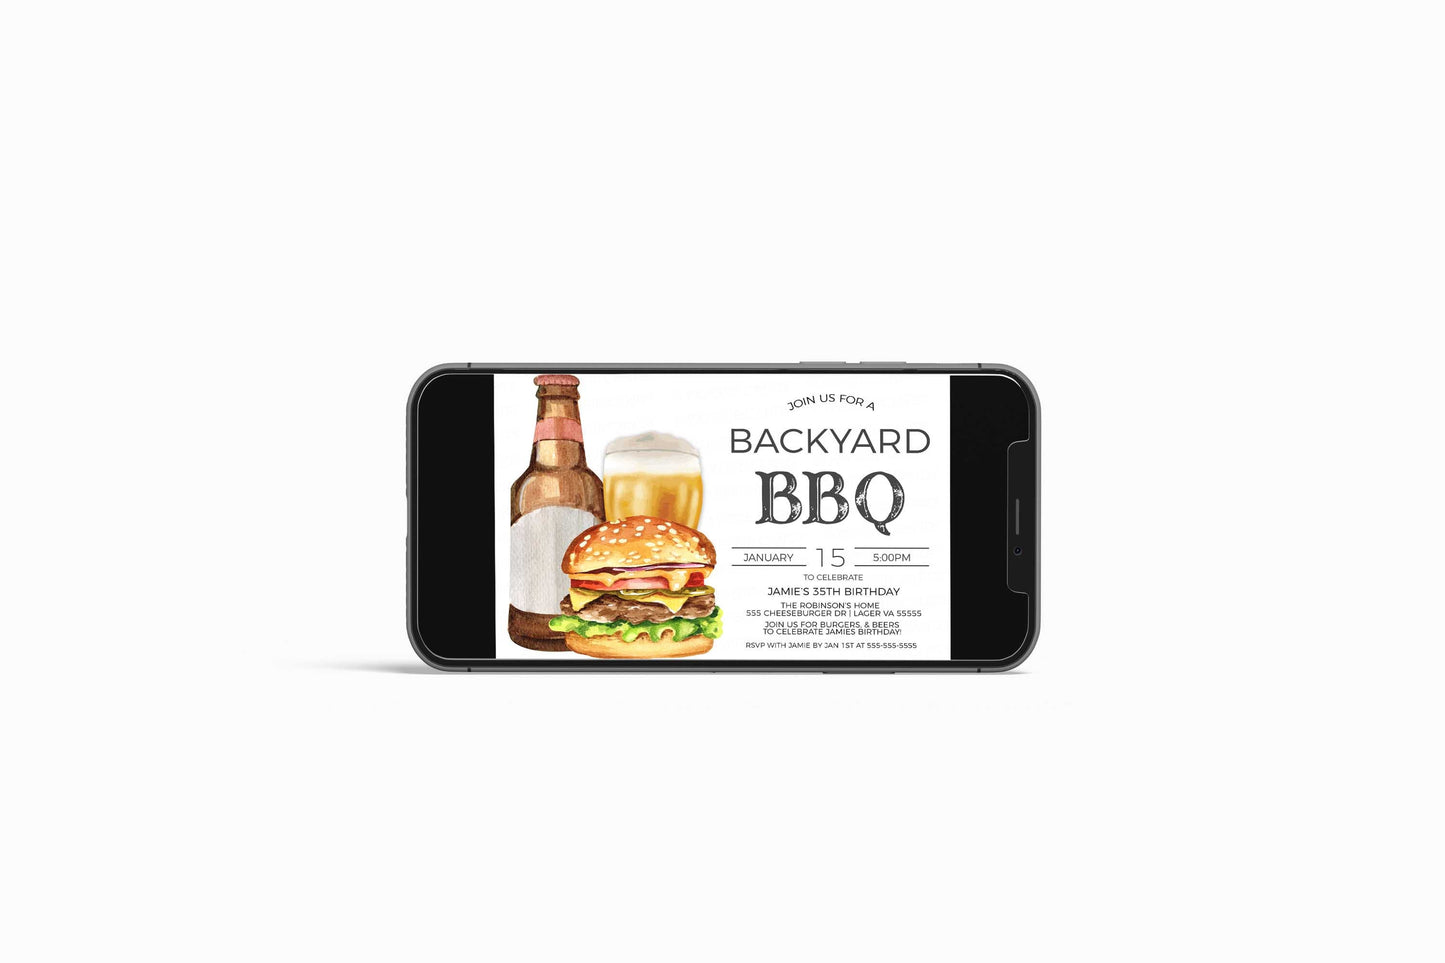 Backyard BBQ Invitation, Barbeque Burgers Beer Invite, Grilling Cookout Barbecue Party, Spring Summer Shower Editable Printable Template